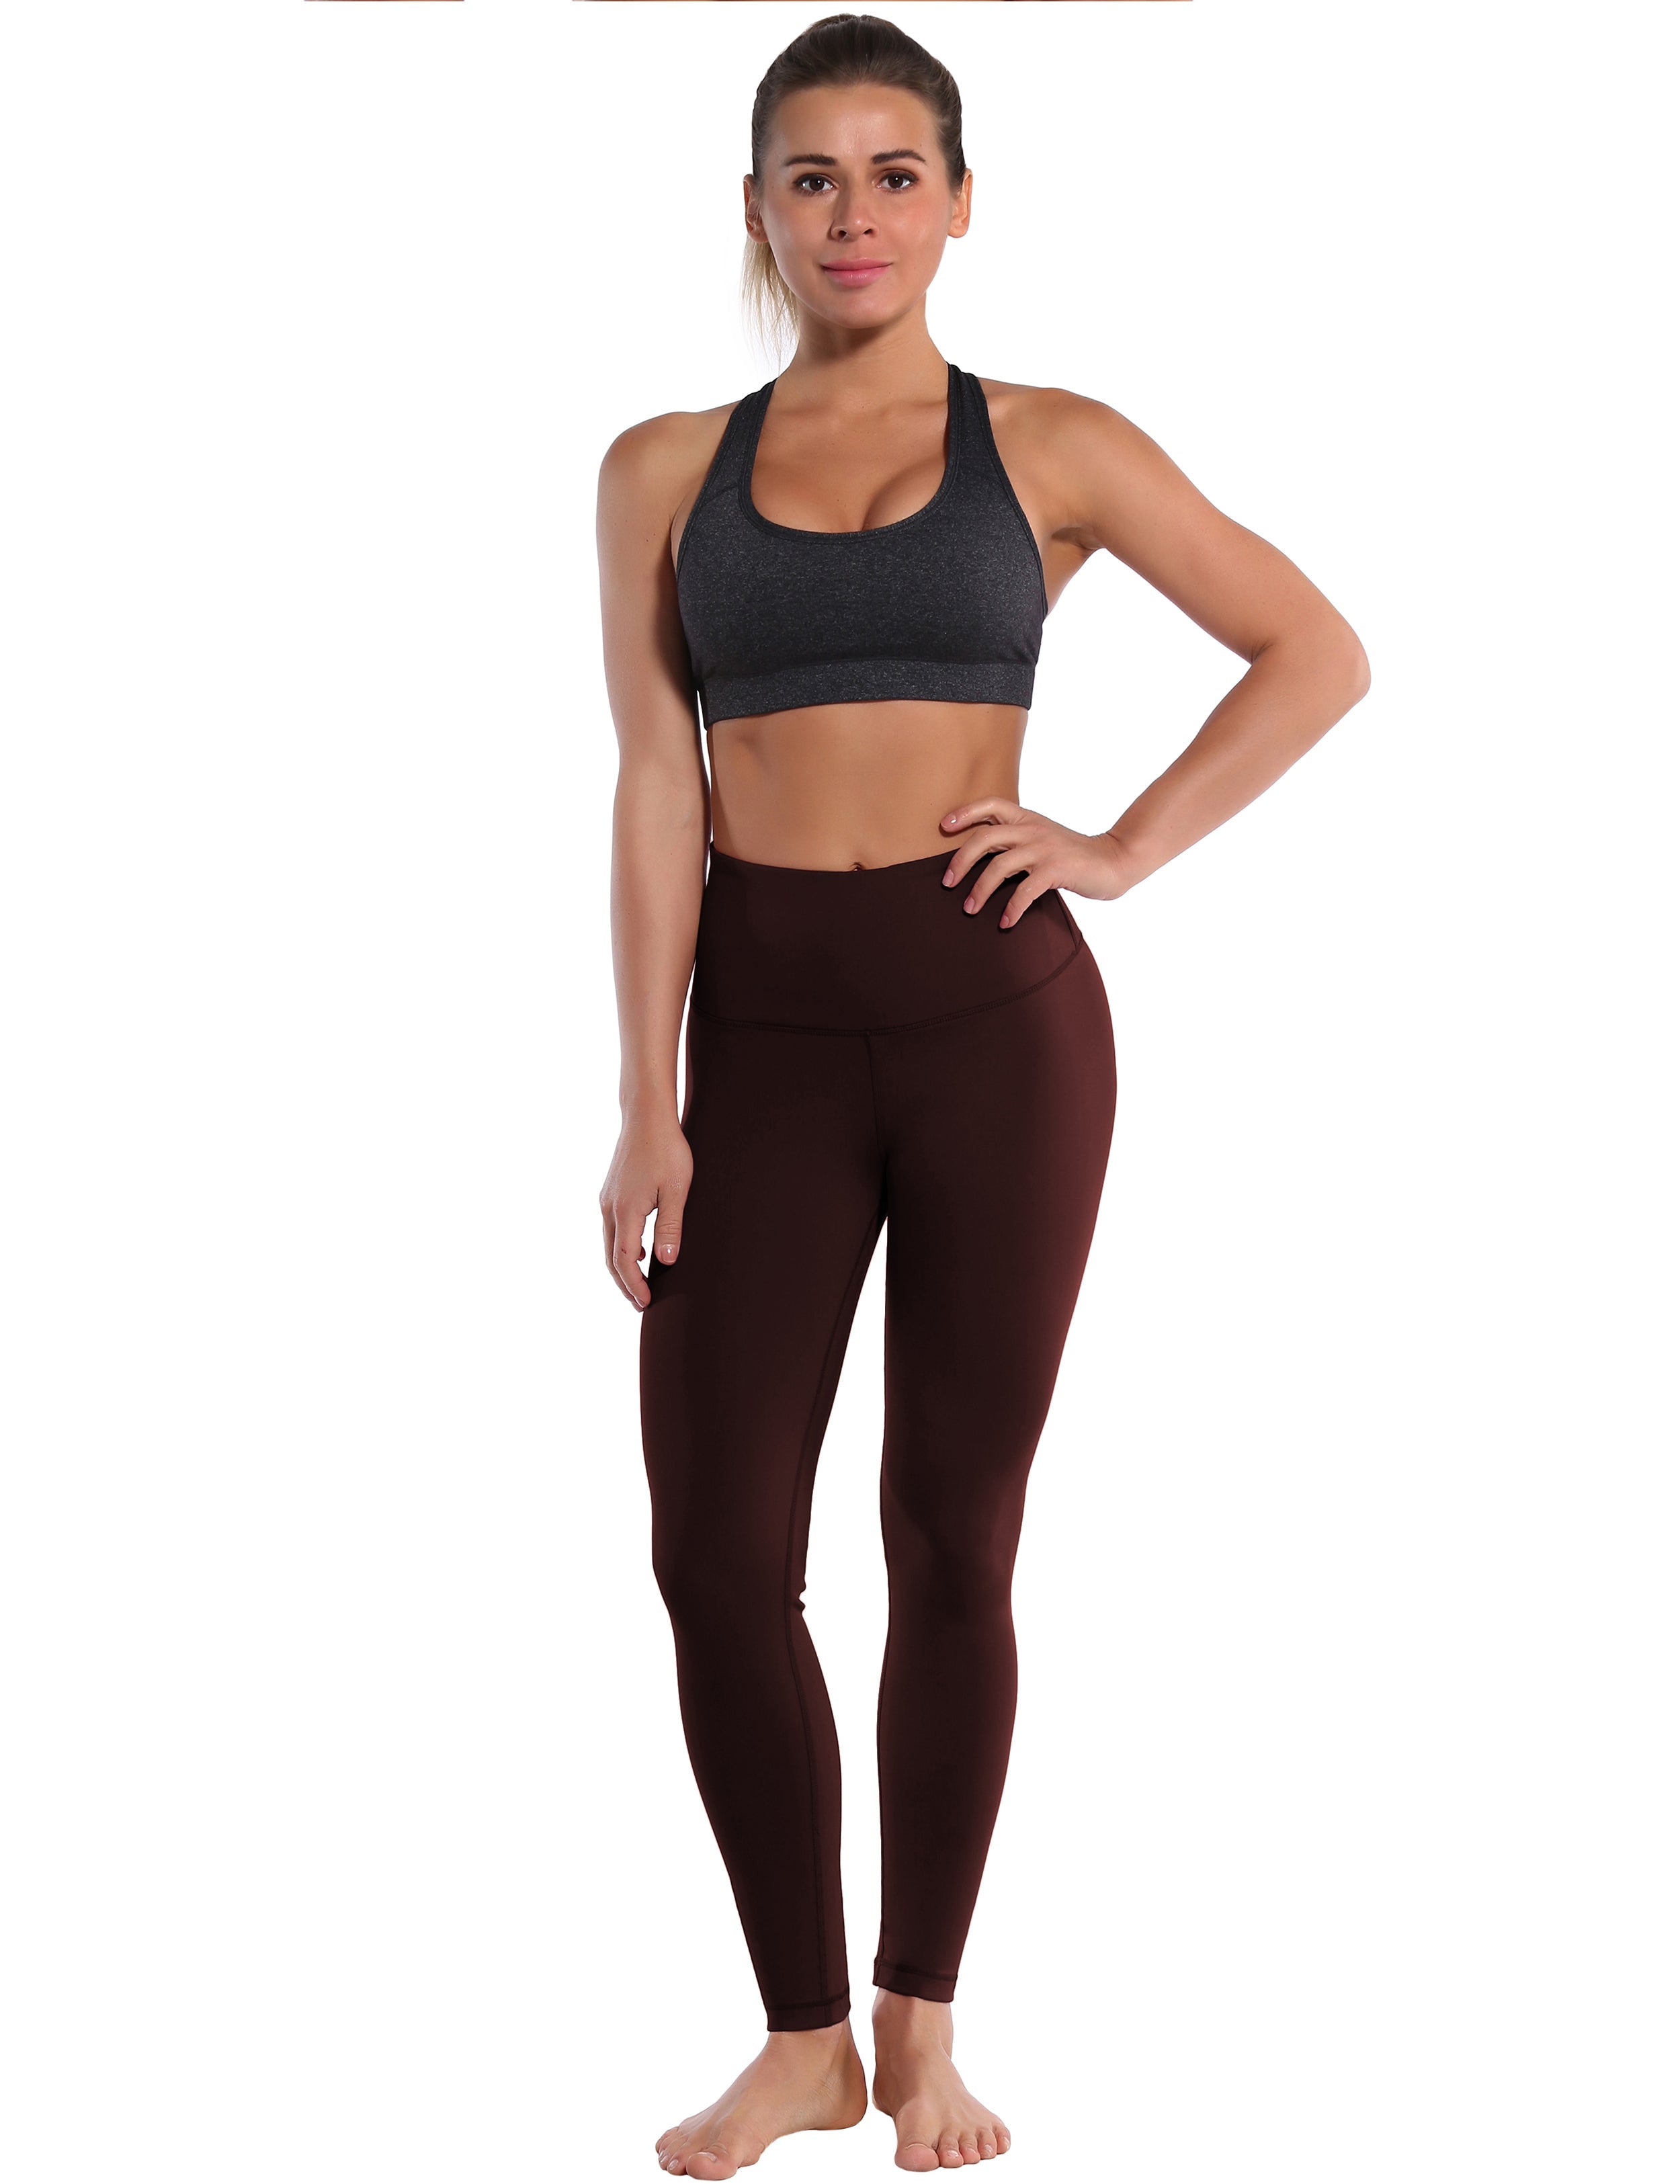 High Waist Gym Pants mahoganymaroon 75%Nylon/25%Spandex Fabric doesn't attract lint easily 4-way stretch No see-through Moisture-wicking Tummy control Inner pocket Four lengths